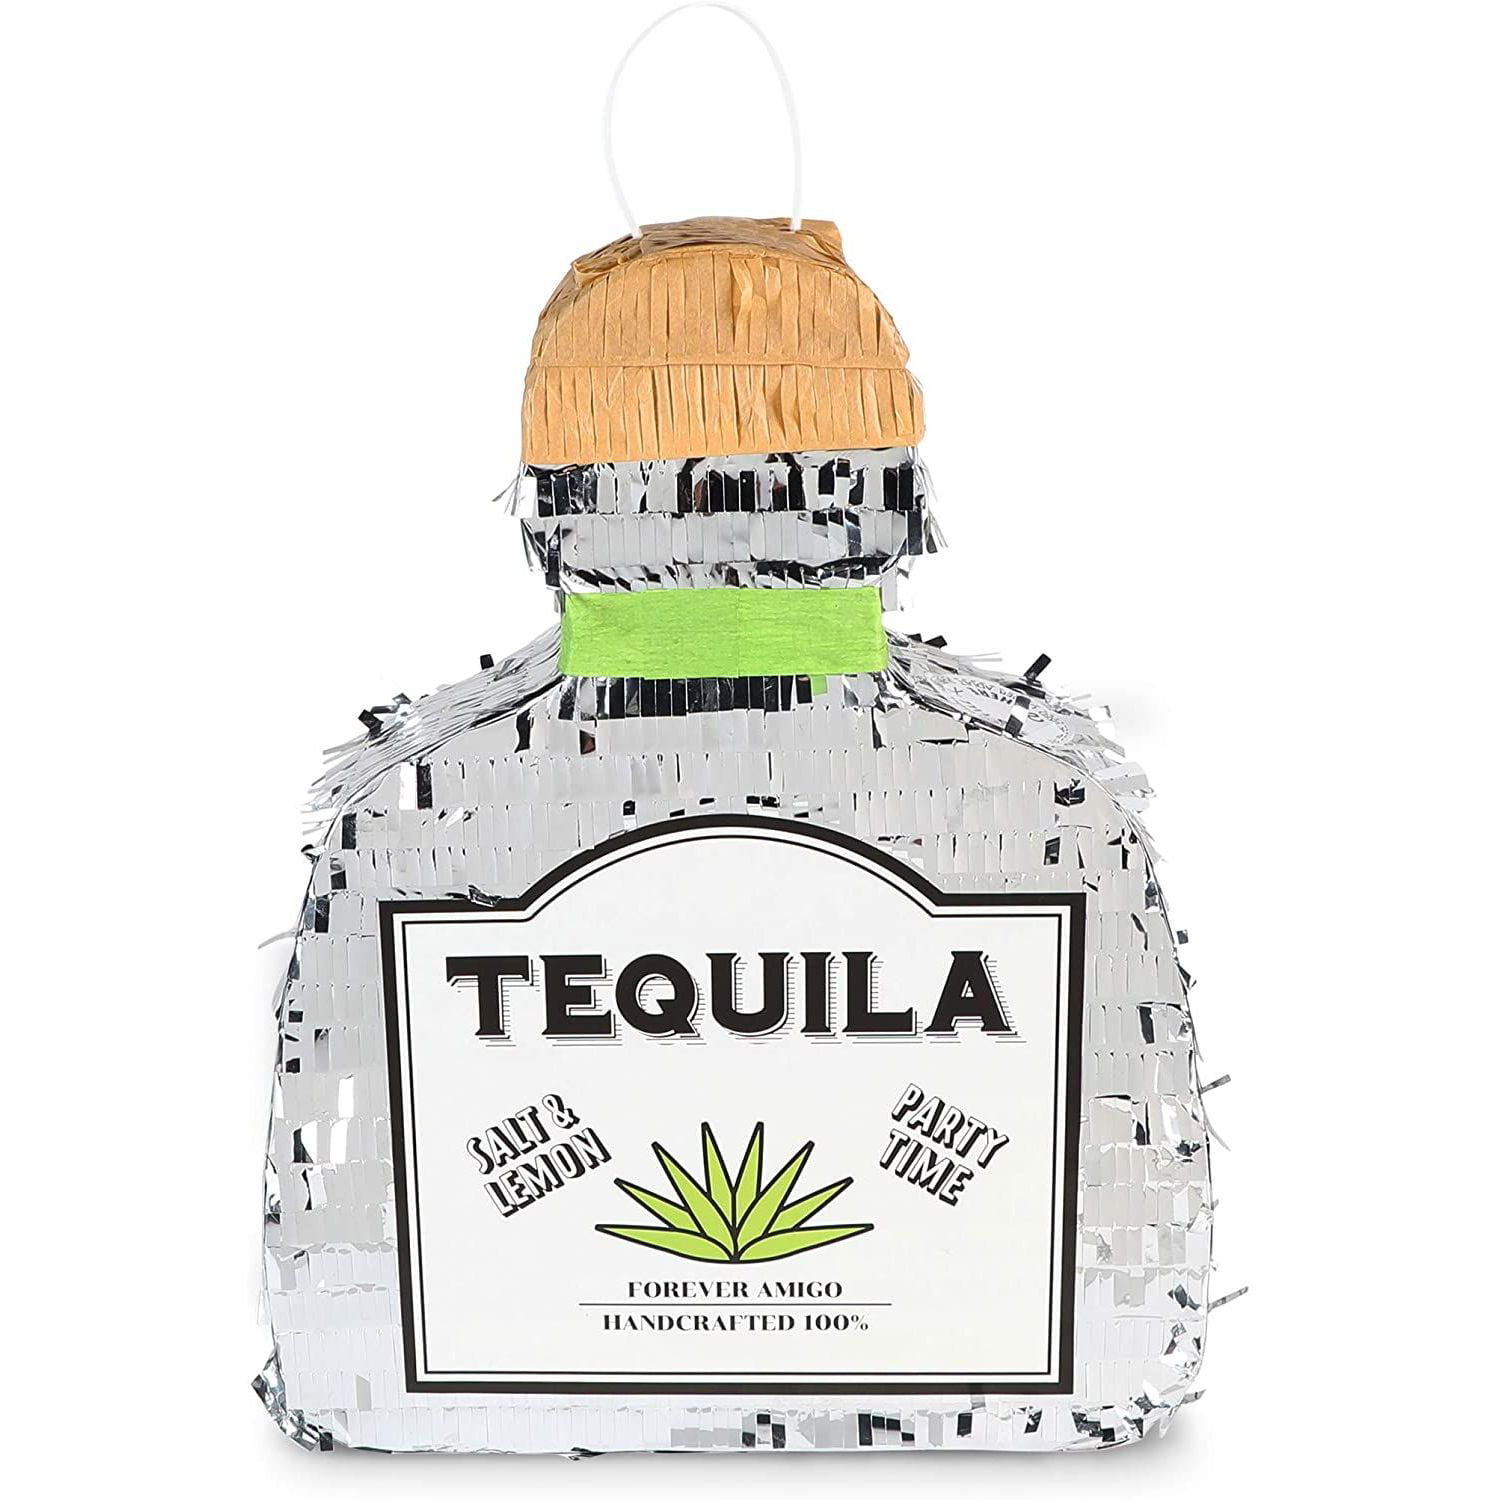 Details about   LYTIO Tequila Bottle Pinata For Party Games or Decoration 